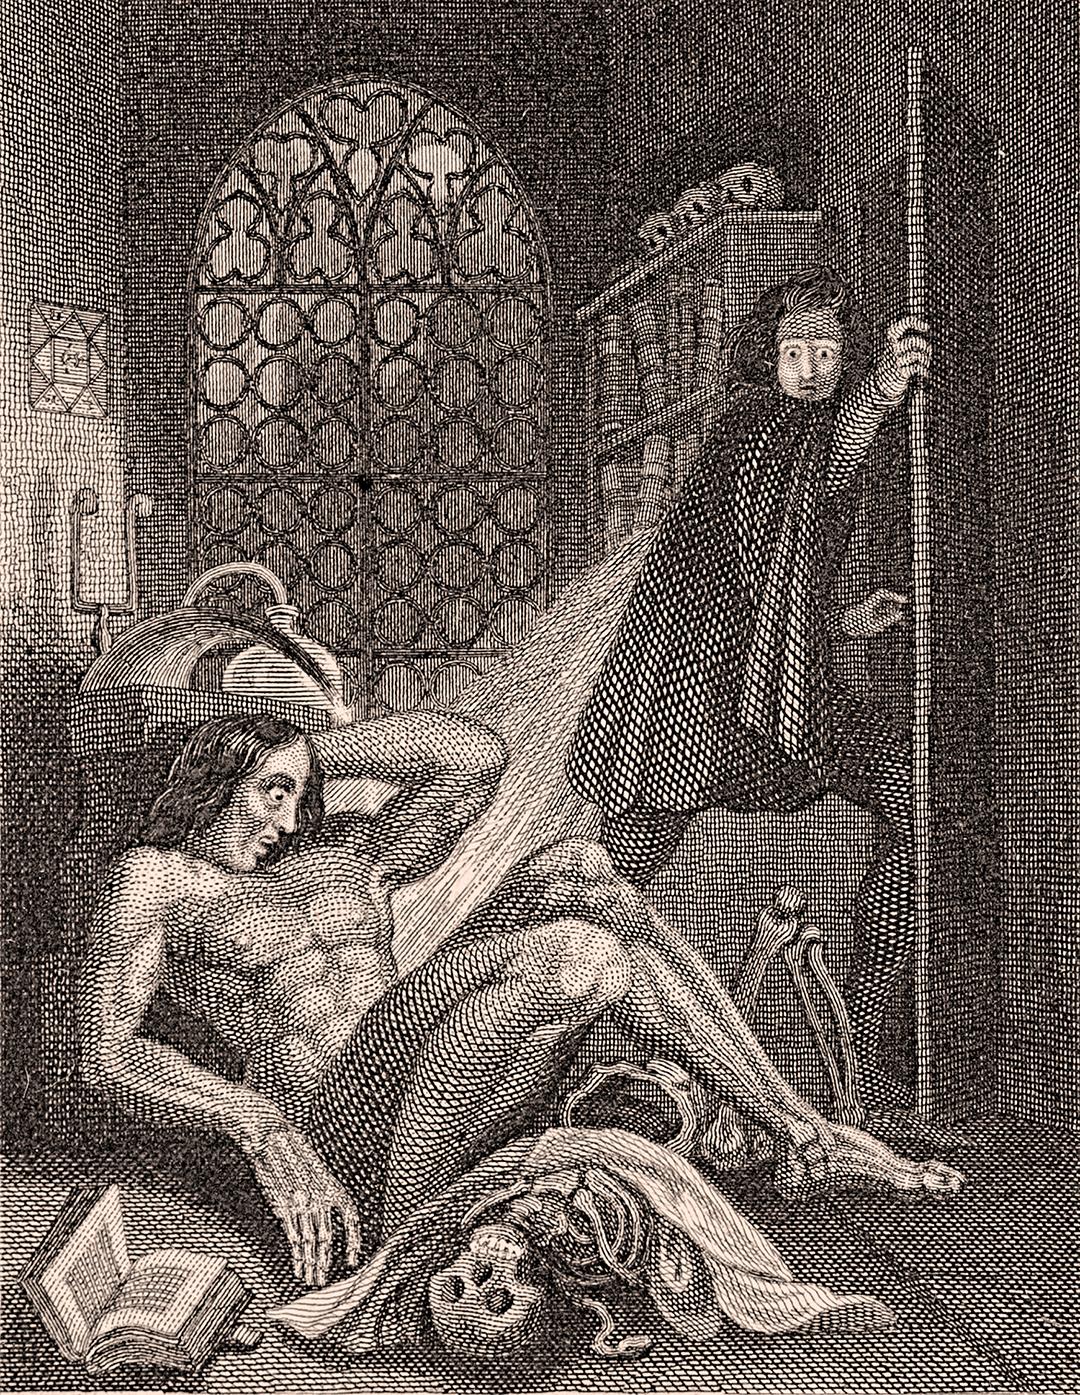 Victor Frankenstein becoming disgusted at his monstrous creation. Illustration from the frontispiece of the 1831 edition of "Frankenstein" by Mary Shelley. Published by Colburn and Bentley, London, 1831. (Public Domain)